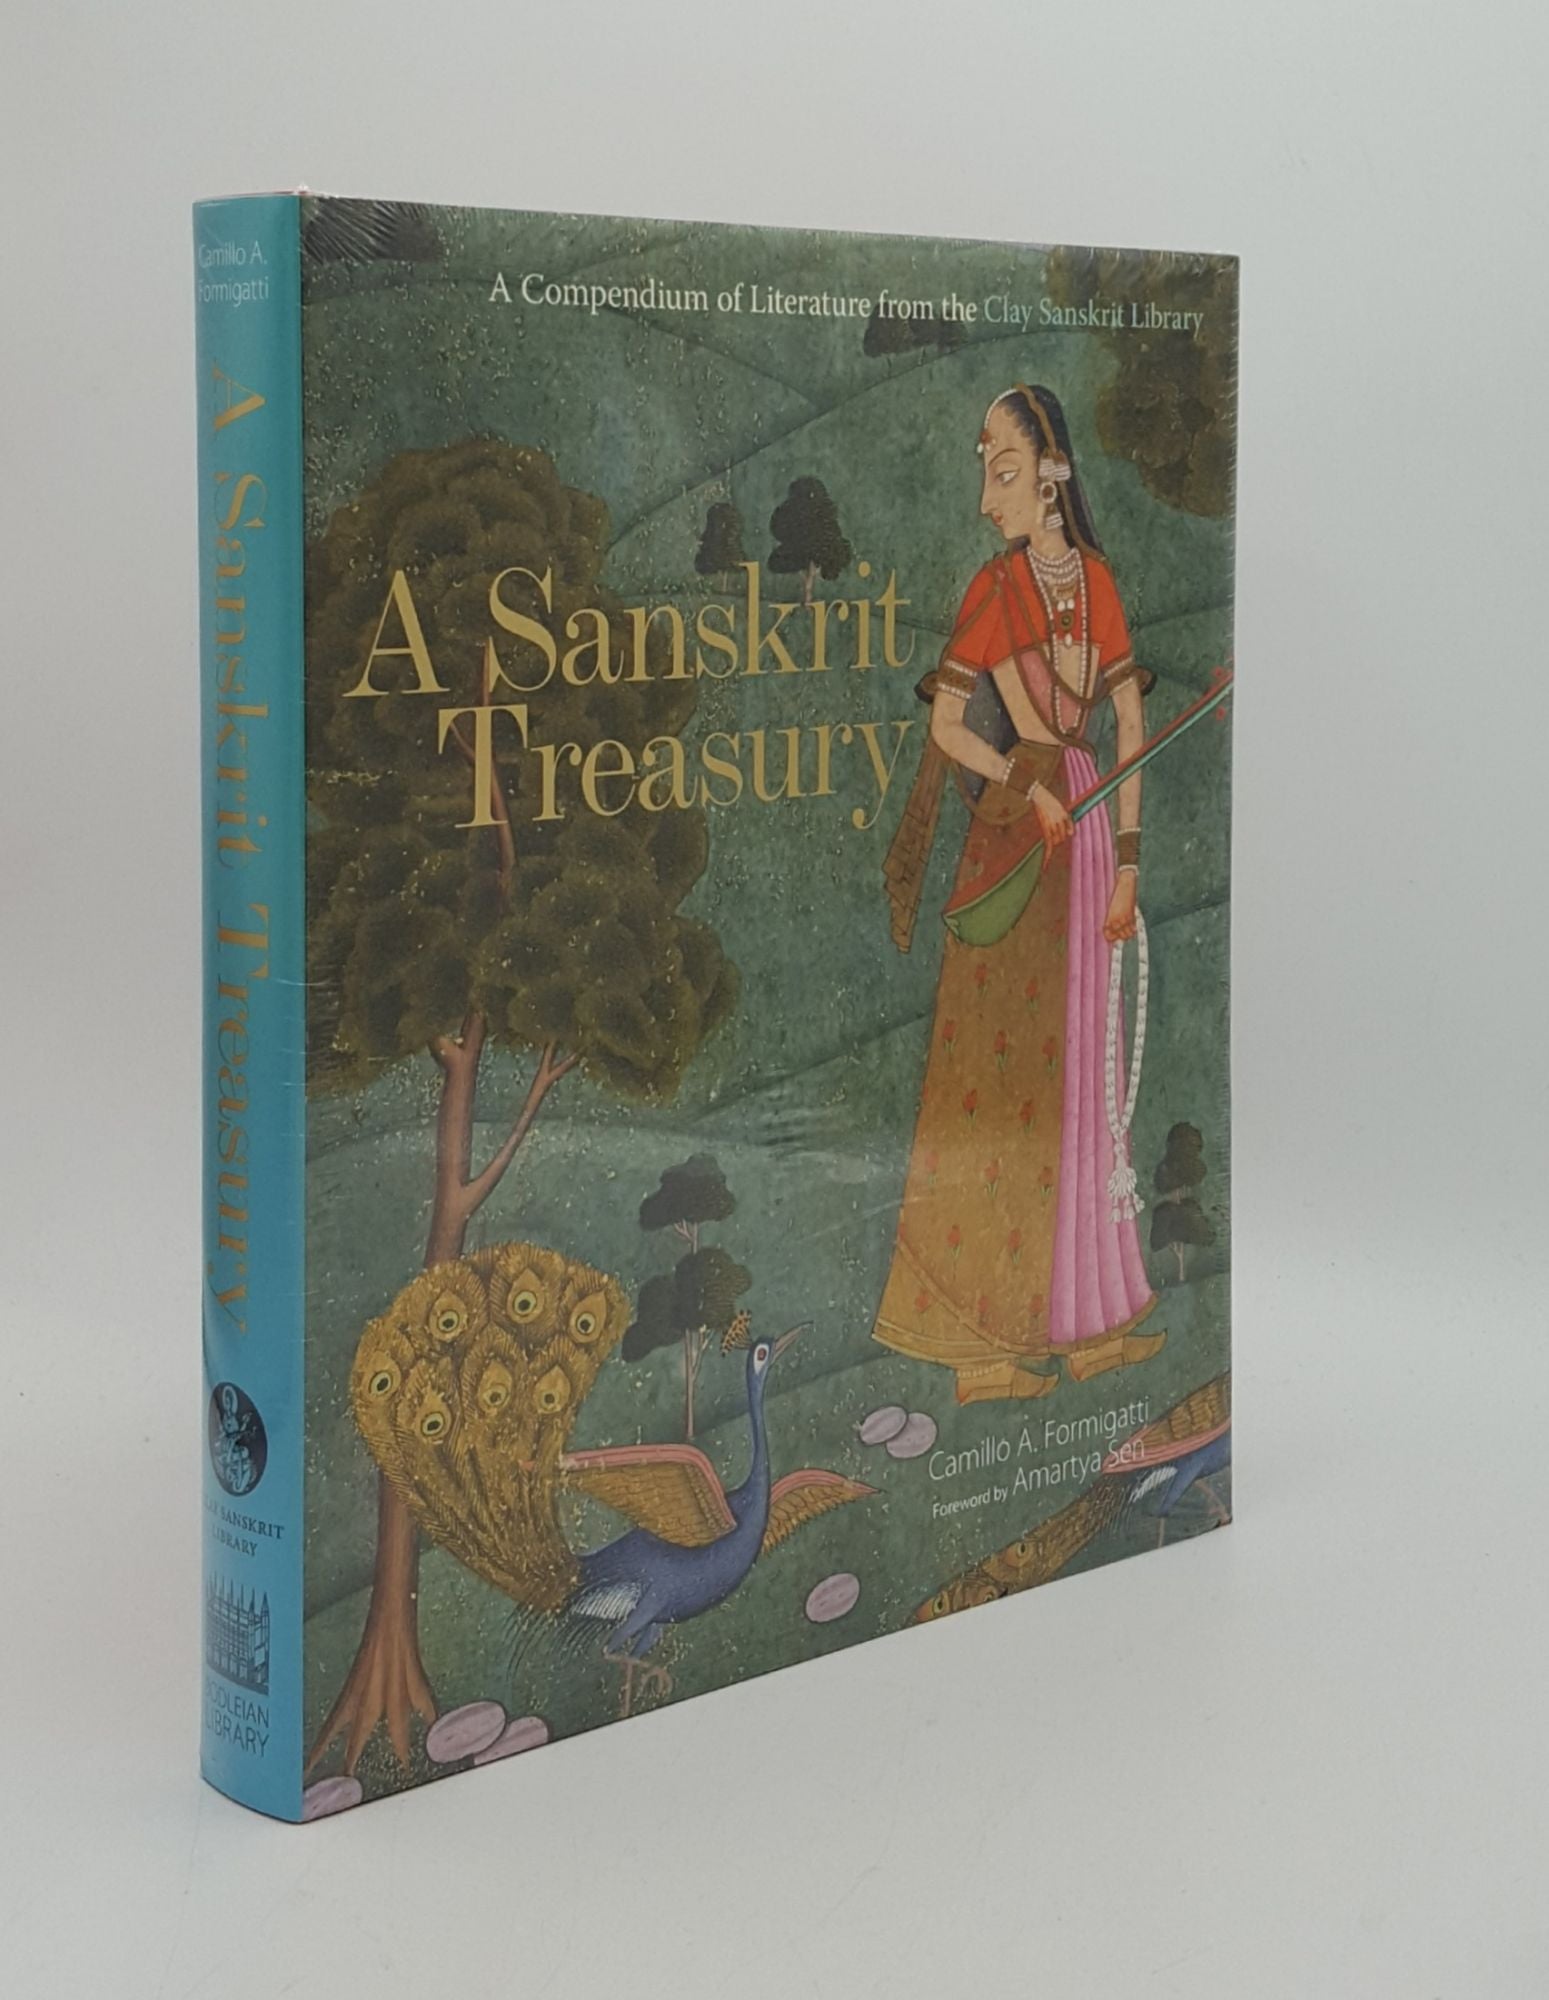 FORMIGATTI Camillo A. - Sanskrit Treasury a Compendium of Literature from the Clay Sanskrit Library